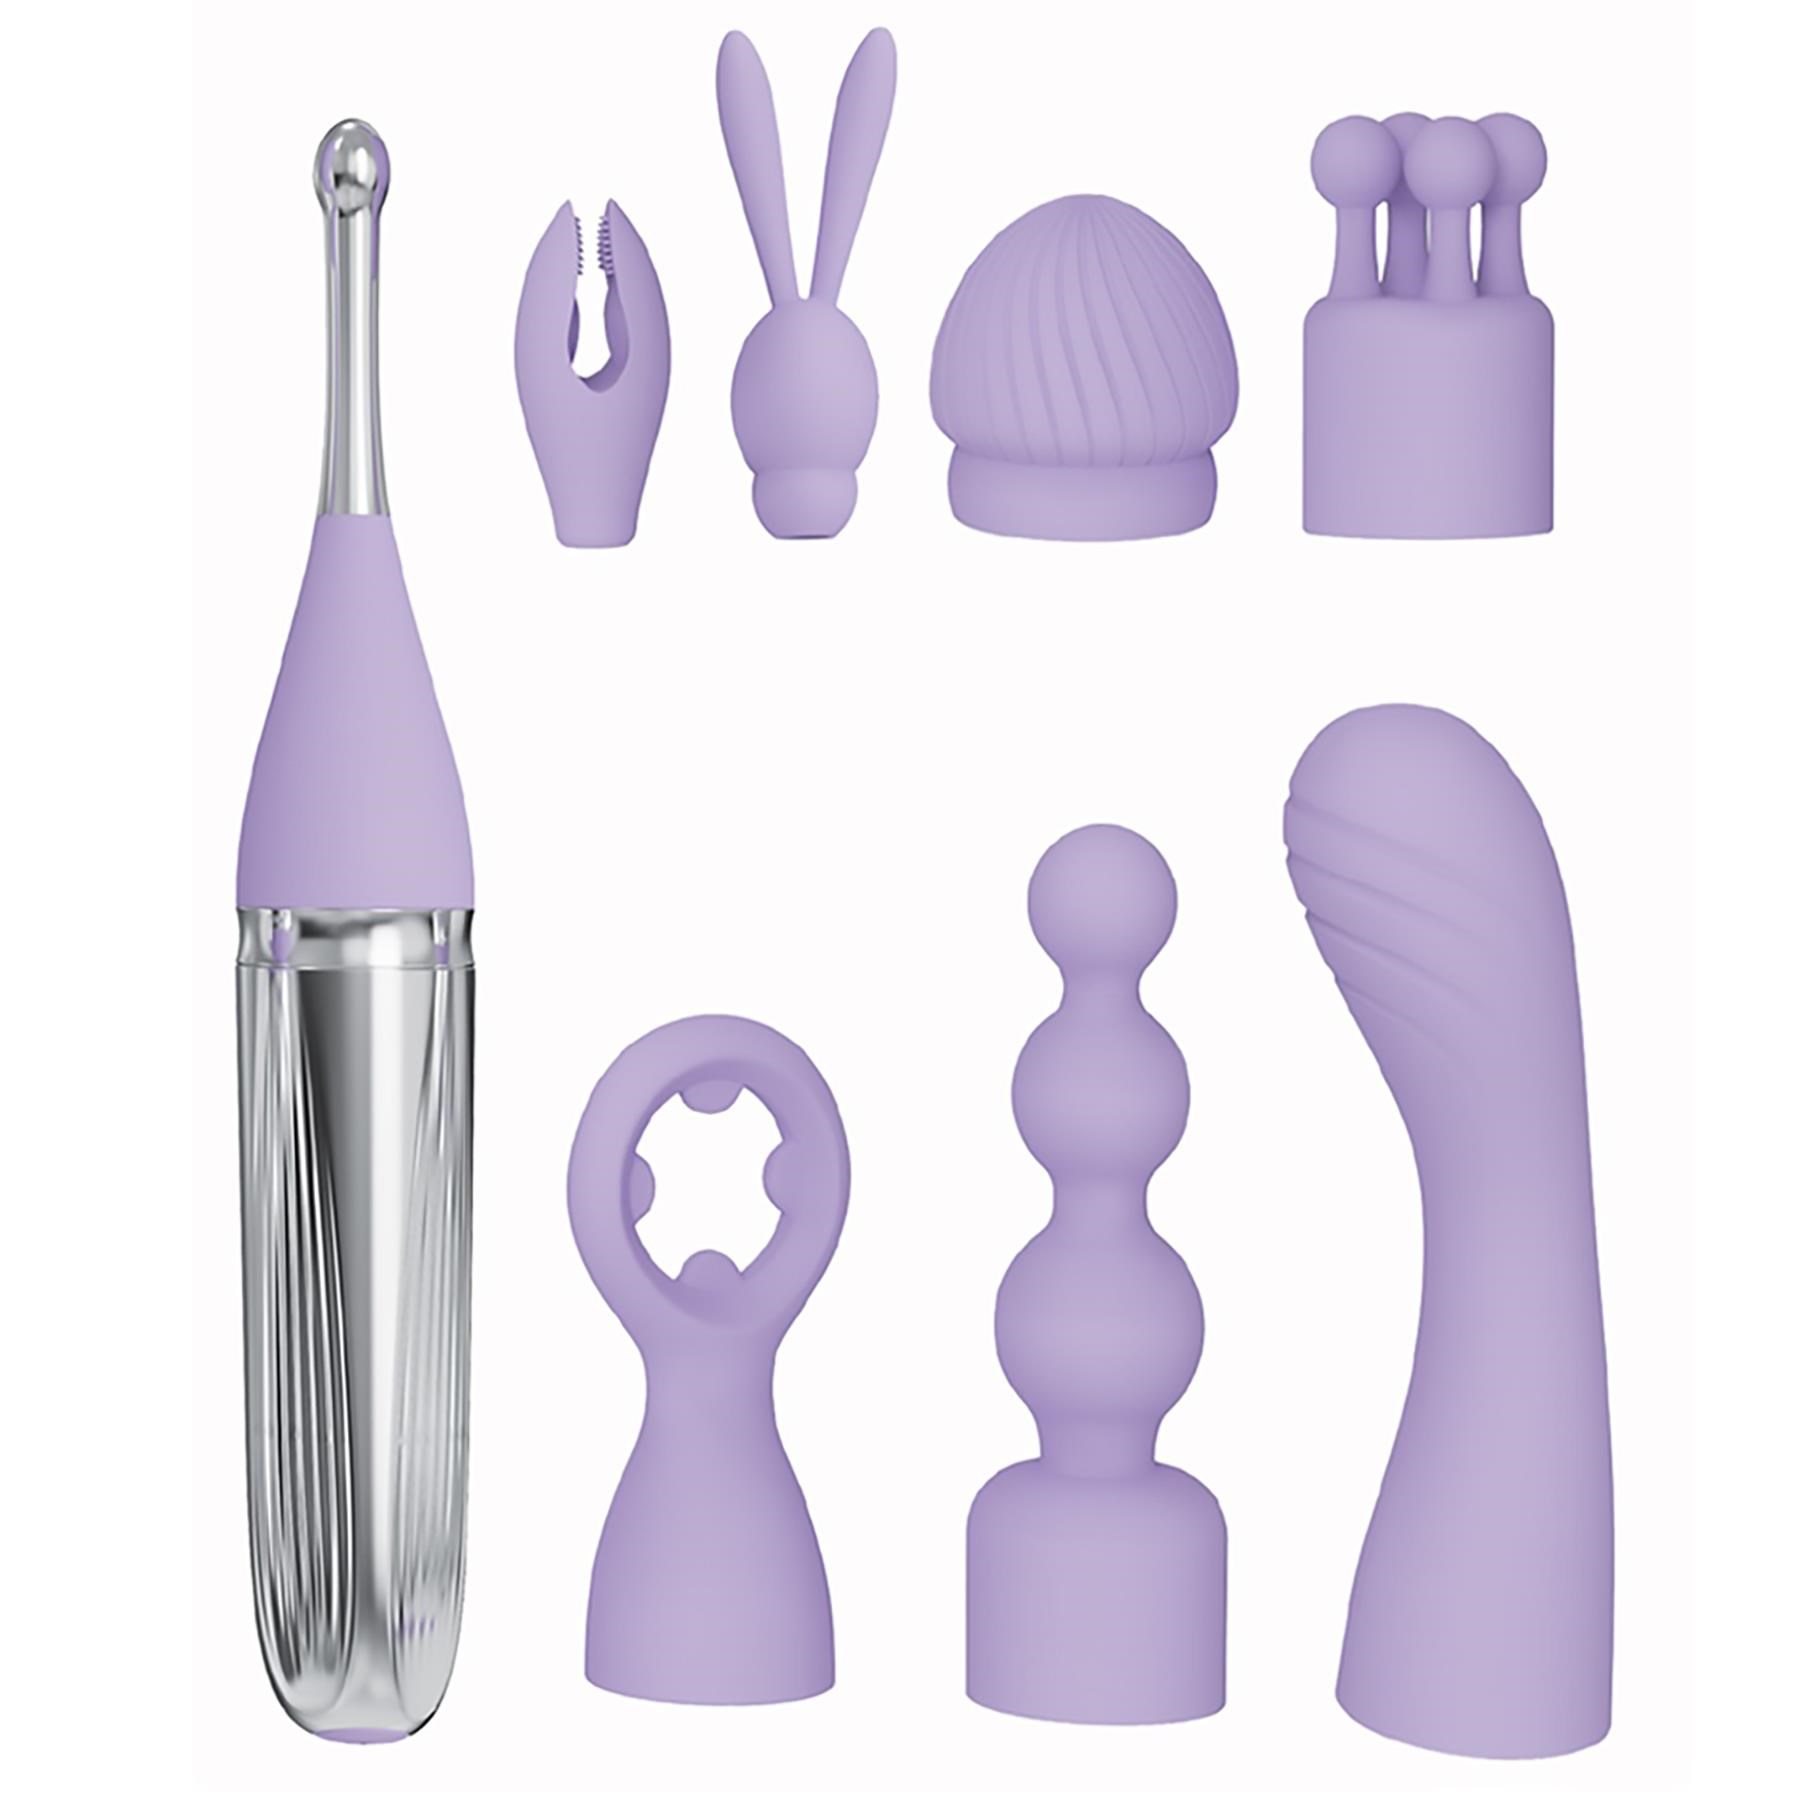 Adam & Eve Sweet Dreams Massager Kit - All Components